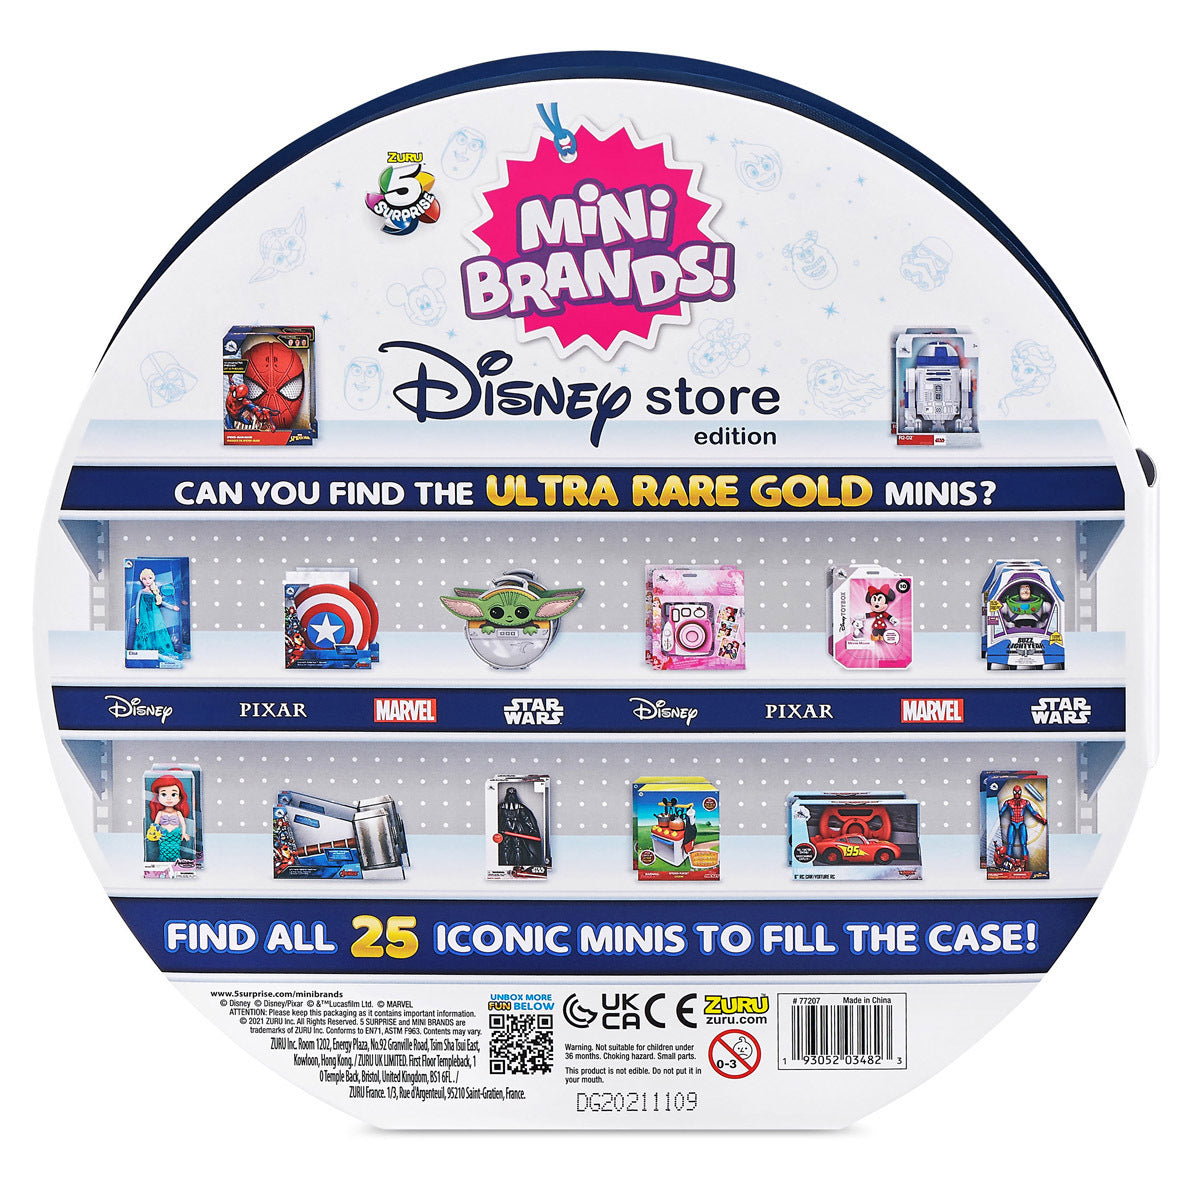 5 Surprise Mini Brands Disney Store Edition Mystery Pack (full case of